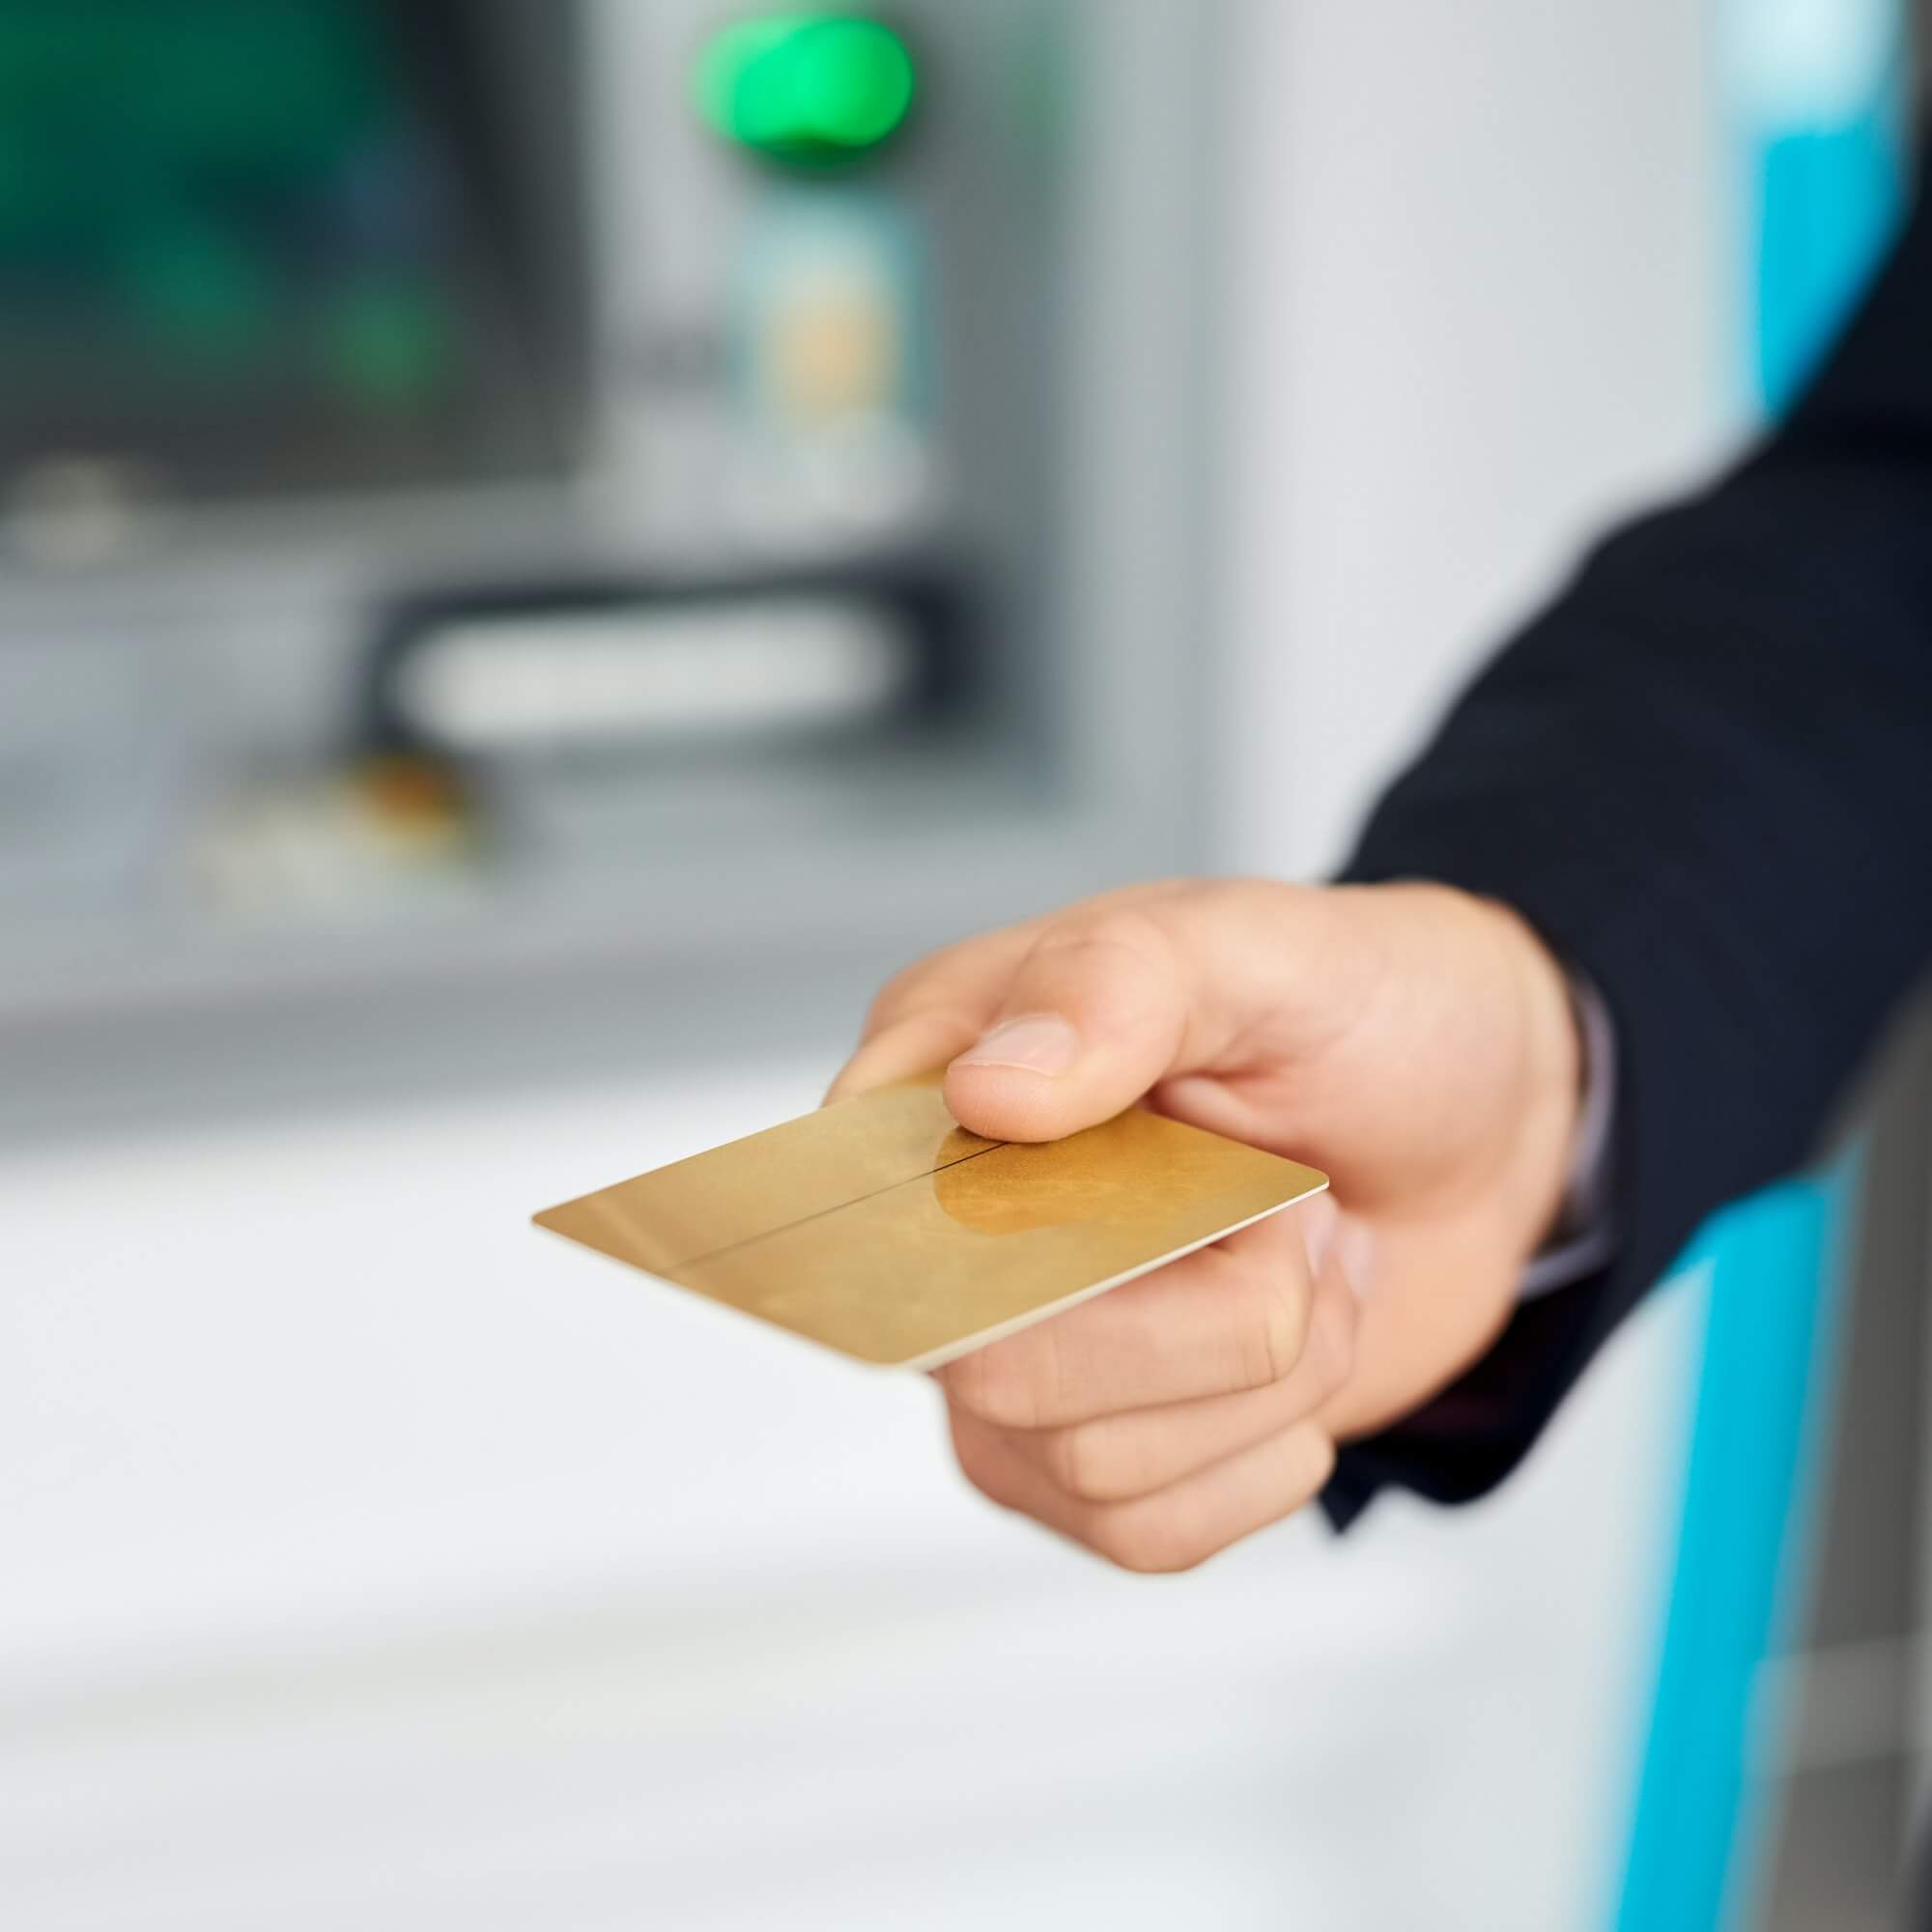 Transactions made simple. Closeup shot of an unidentifiable businessman holding out a credit card.